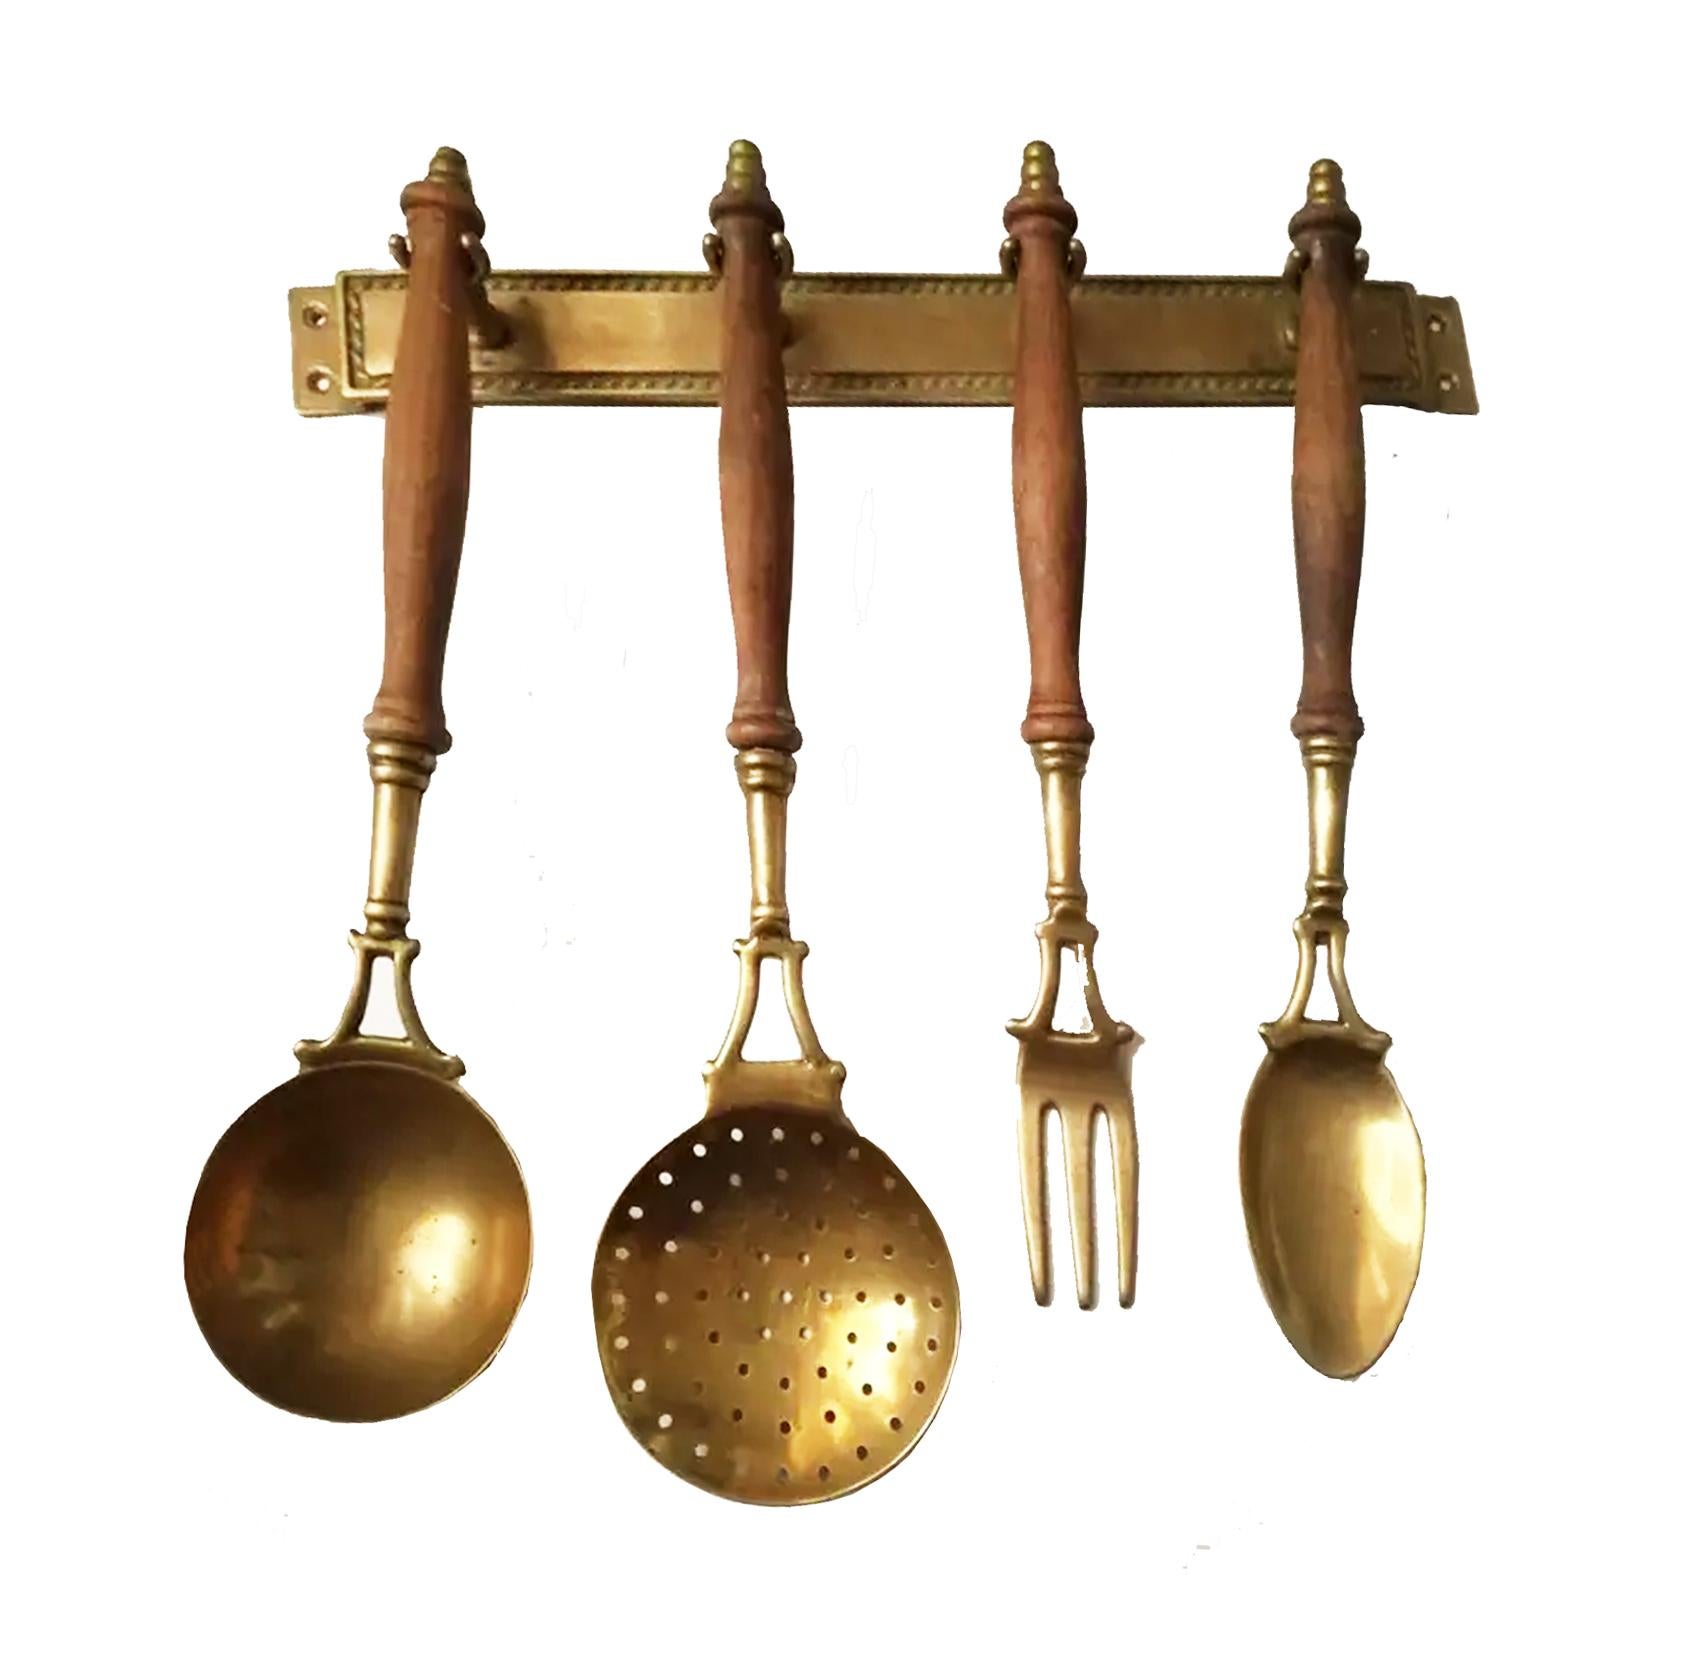 Old Kitchen Utensils Made of Brass with Hanging Bar, Early 20th Century 1